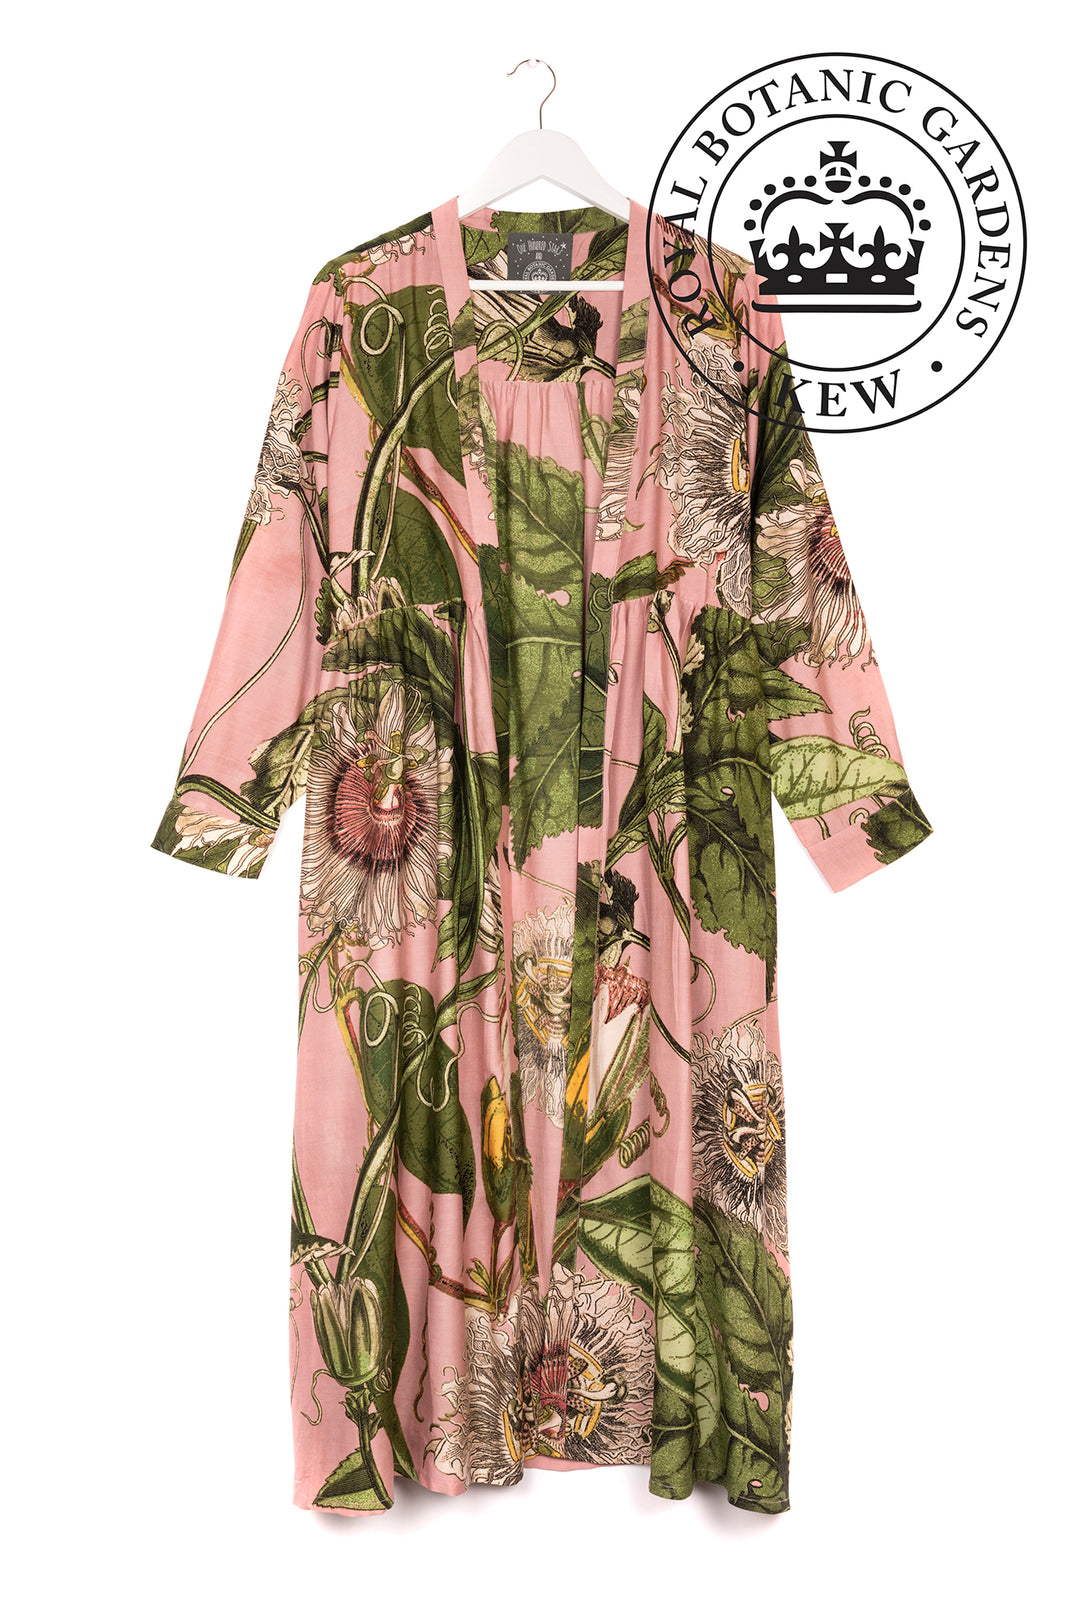 KEW Passion Flower Pink Duster Coat